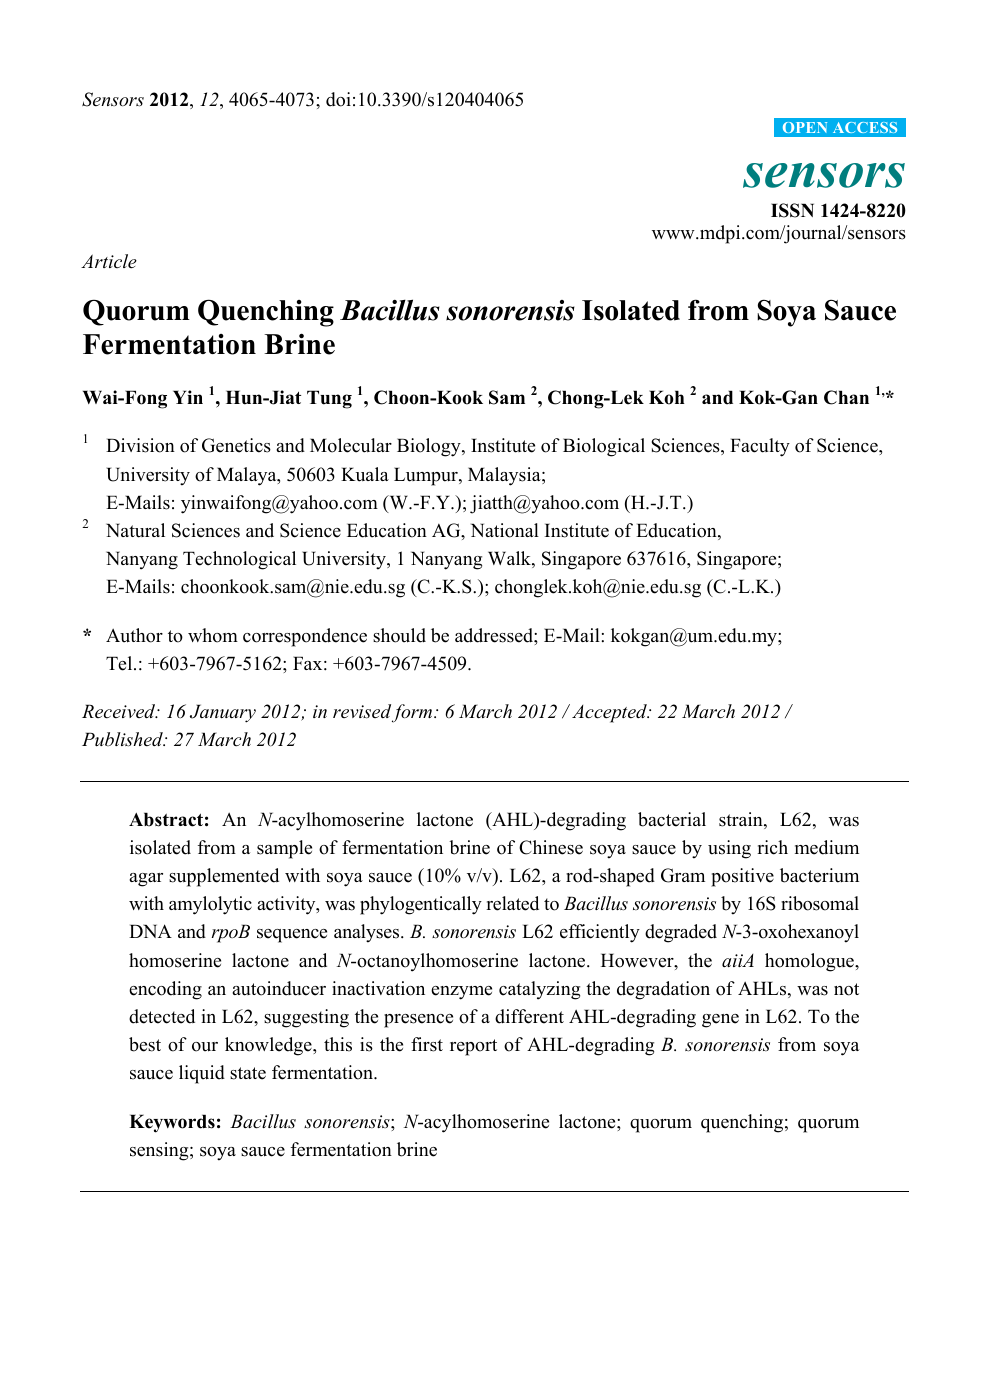 Quorum Quenching Bacillus Sonorensis Isolated From Soya Sauce Fermentation Brine Topic Of Research Paper In Biological Sciences Download Scholarly Article Pdf And Read For Free On Cyberleninka Open Science Hub